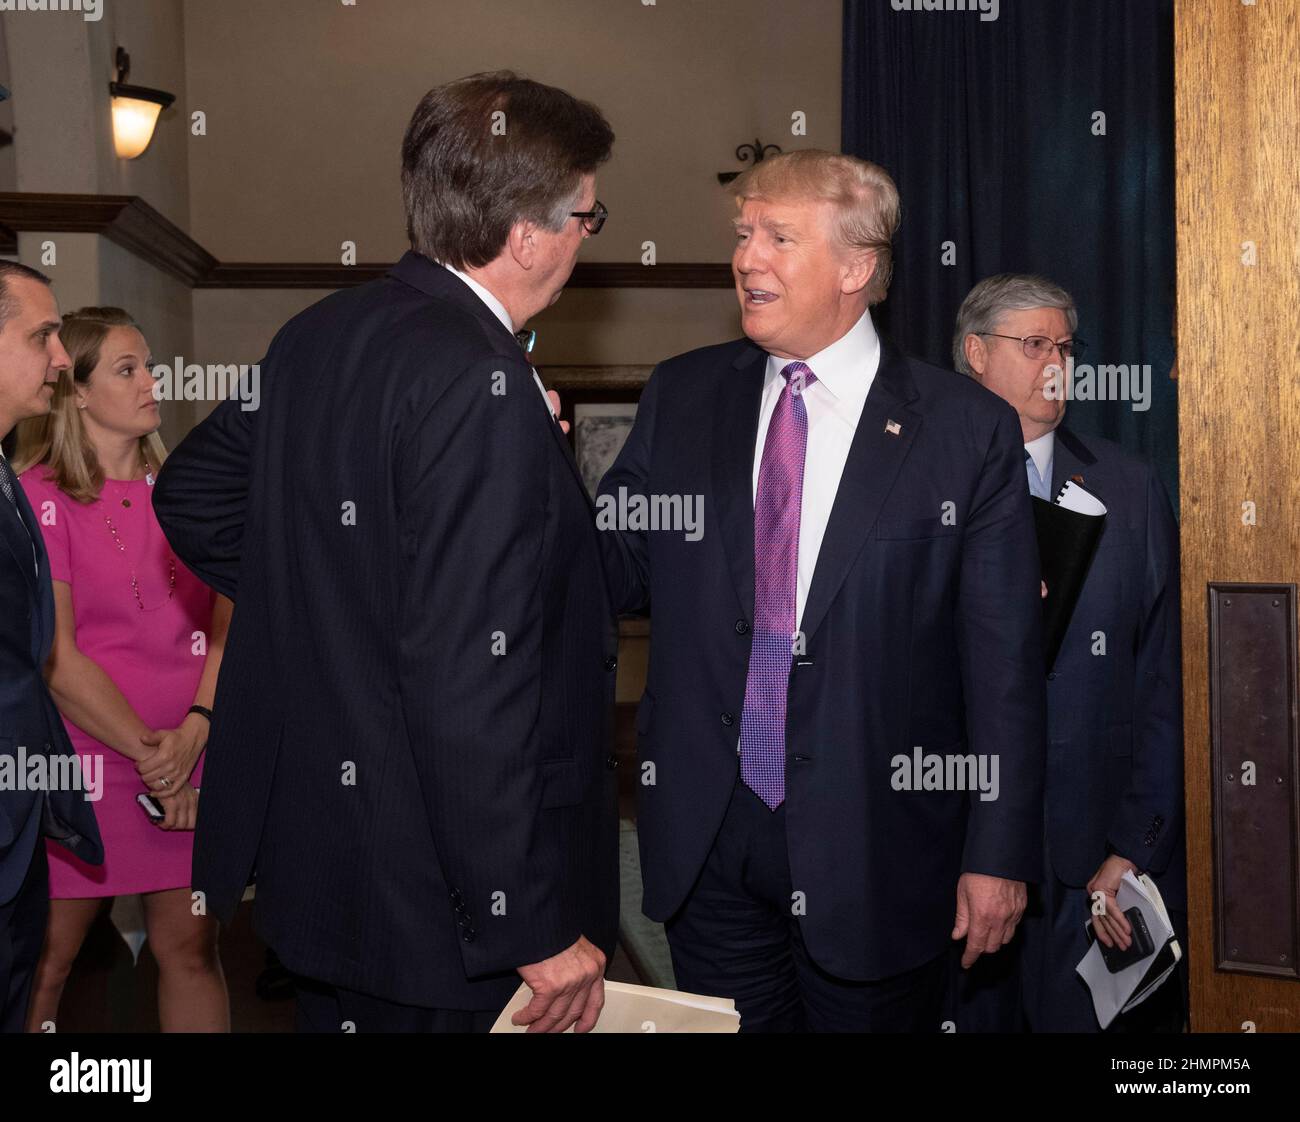 San Antonio,  Texas USA  August 23, 2016: Republican presidential nominee DONALD TRUMP brings his unconventional campaign to Texas with a swing through mostly Democratic central Texas with fund raisers and a rally. Here he converses backstage with Lt. Gov. DAN PATRICK, who heads up his Texas campaign. ©Bob Daemmrich Stock Photo